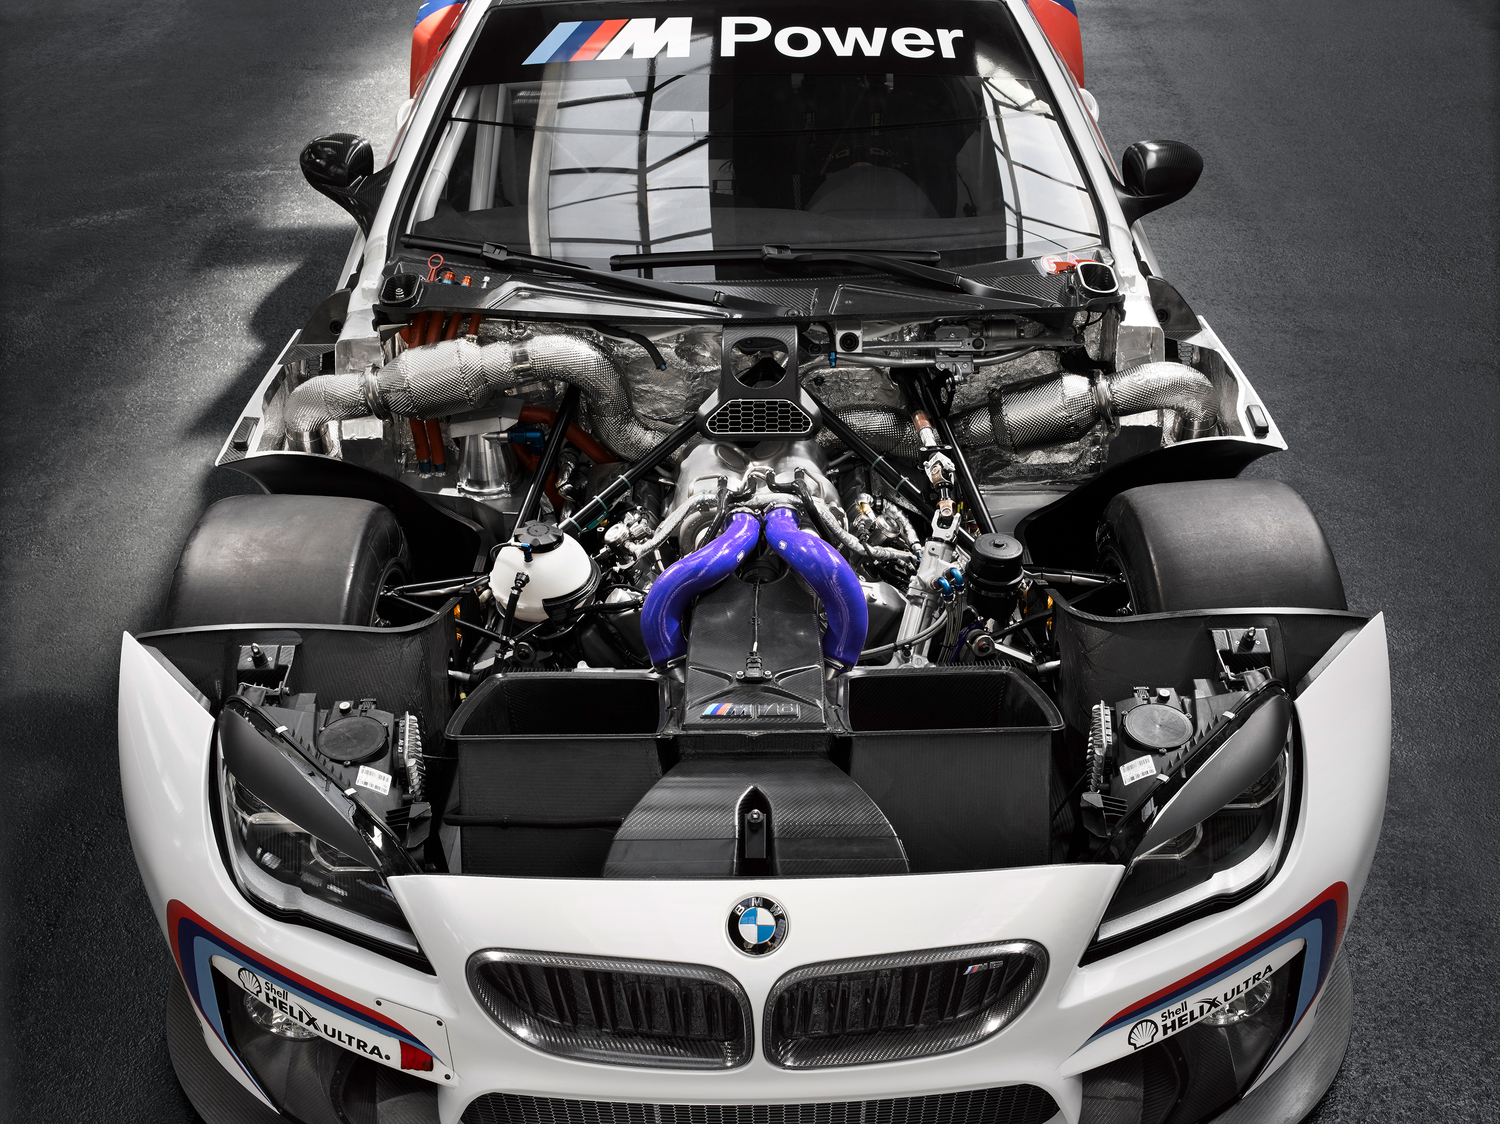 Sport Auto Supercars B M W Tuning M6 E30 Racing Auto Kunst Poster